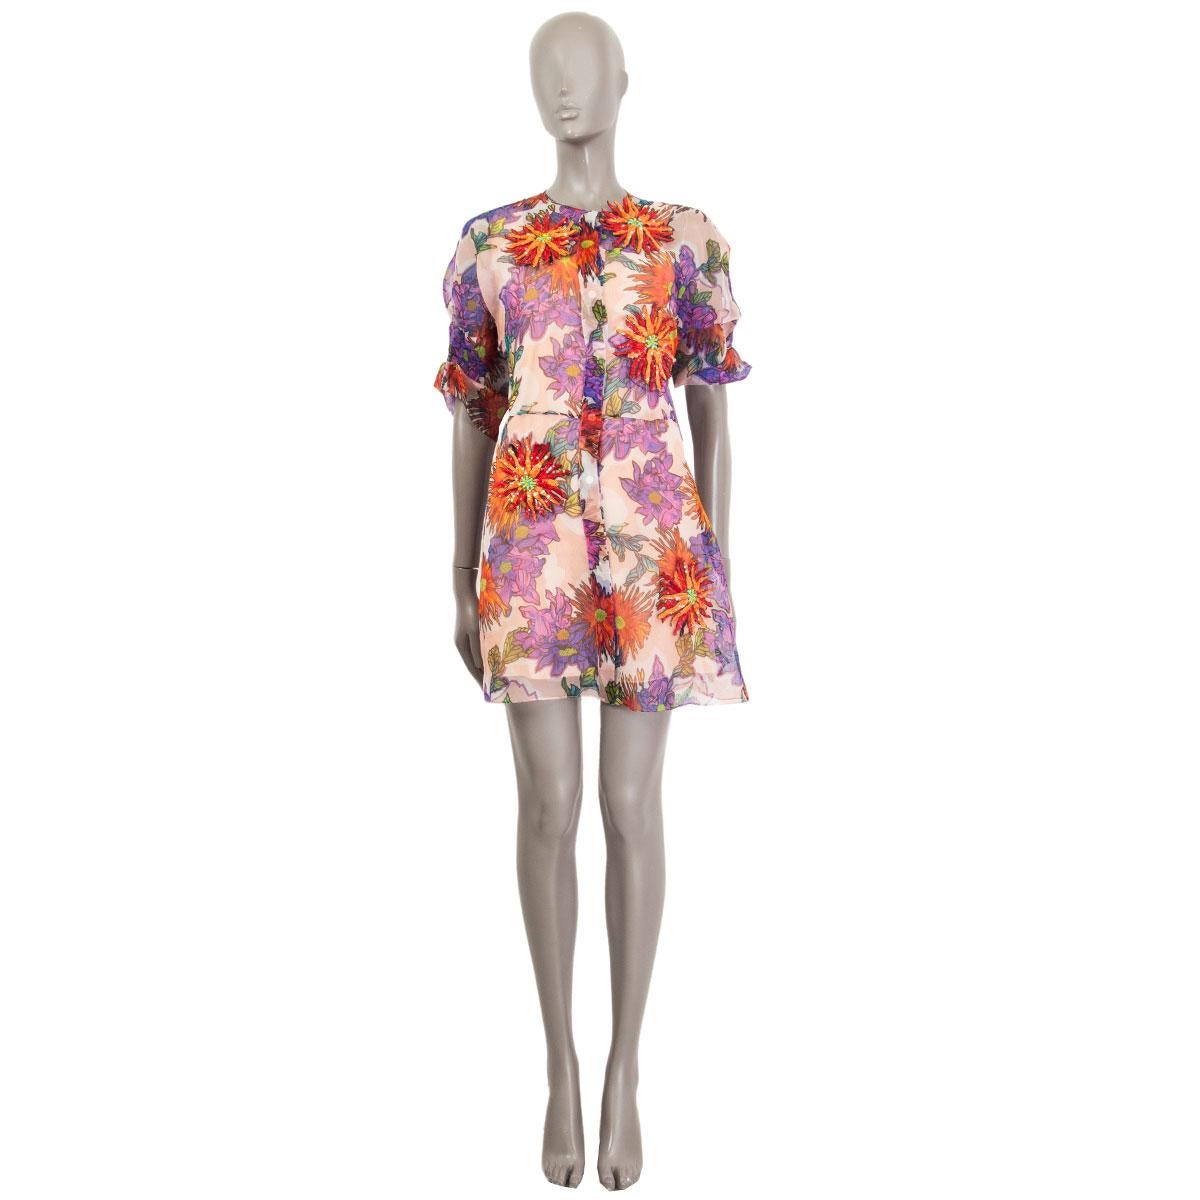 100% authentic Blumarine short-sleeve dress in muticolor floral printed sheer silk (100% Missing Tag). Opens with eight hidden buttons at front and comes with a apricot colored silk slip dress underneath. Embellished with four red and orange sequin